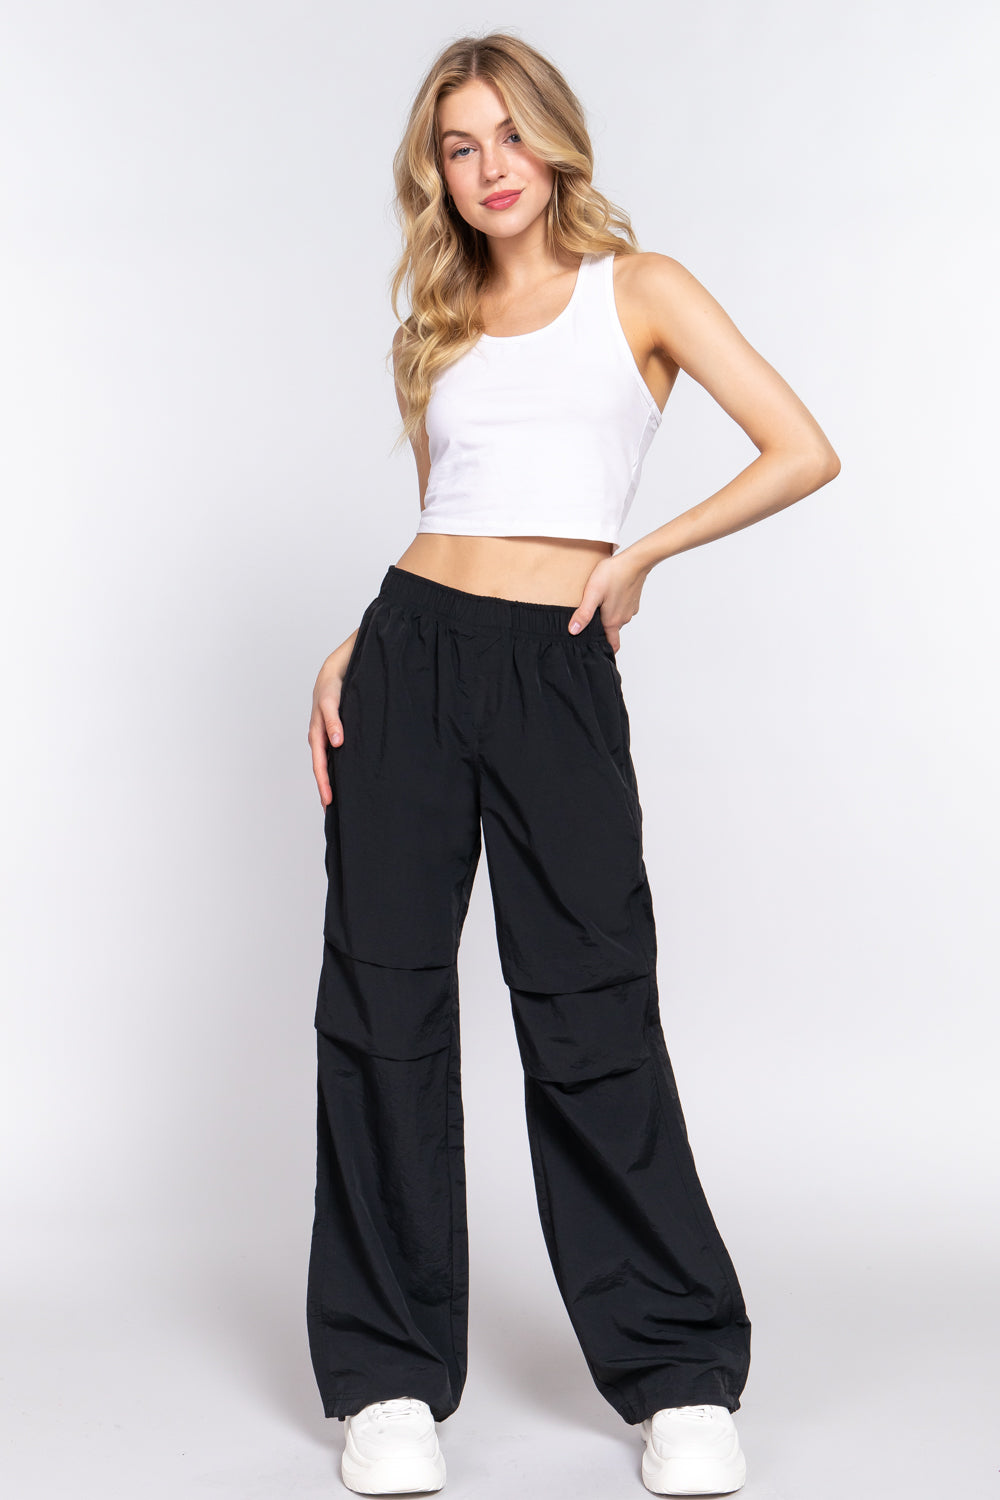 - Waist Elastic Parachute Pants - 3 colors to choose from - womens pants at TFC&H Co.